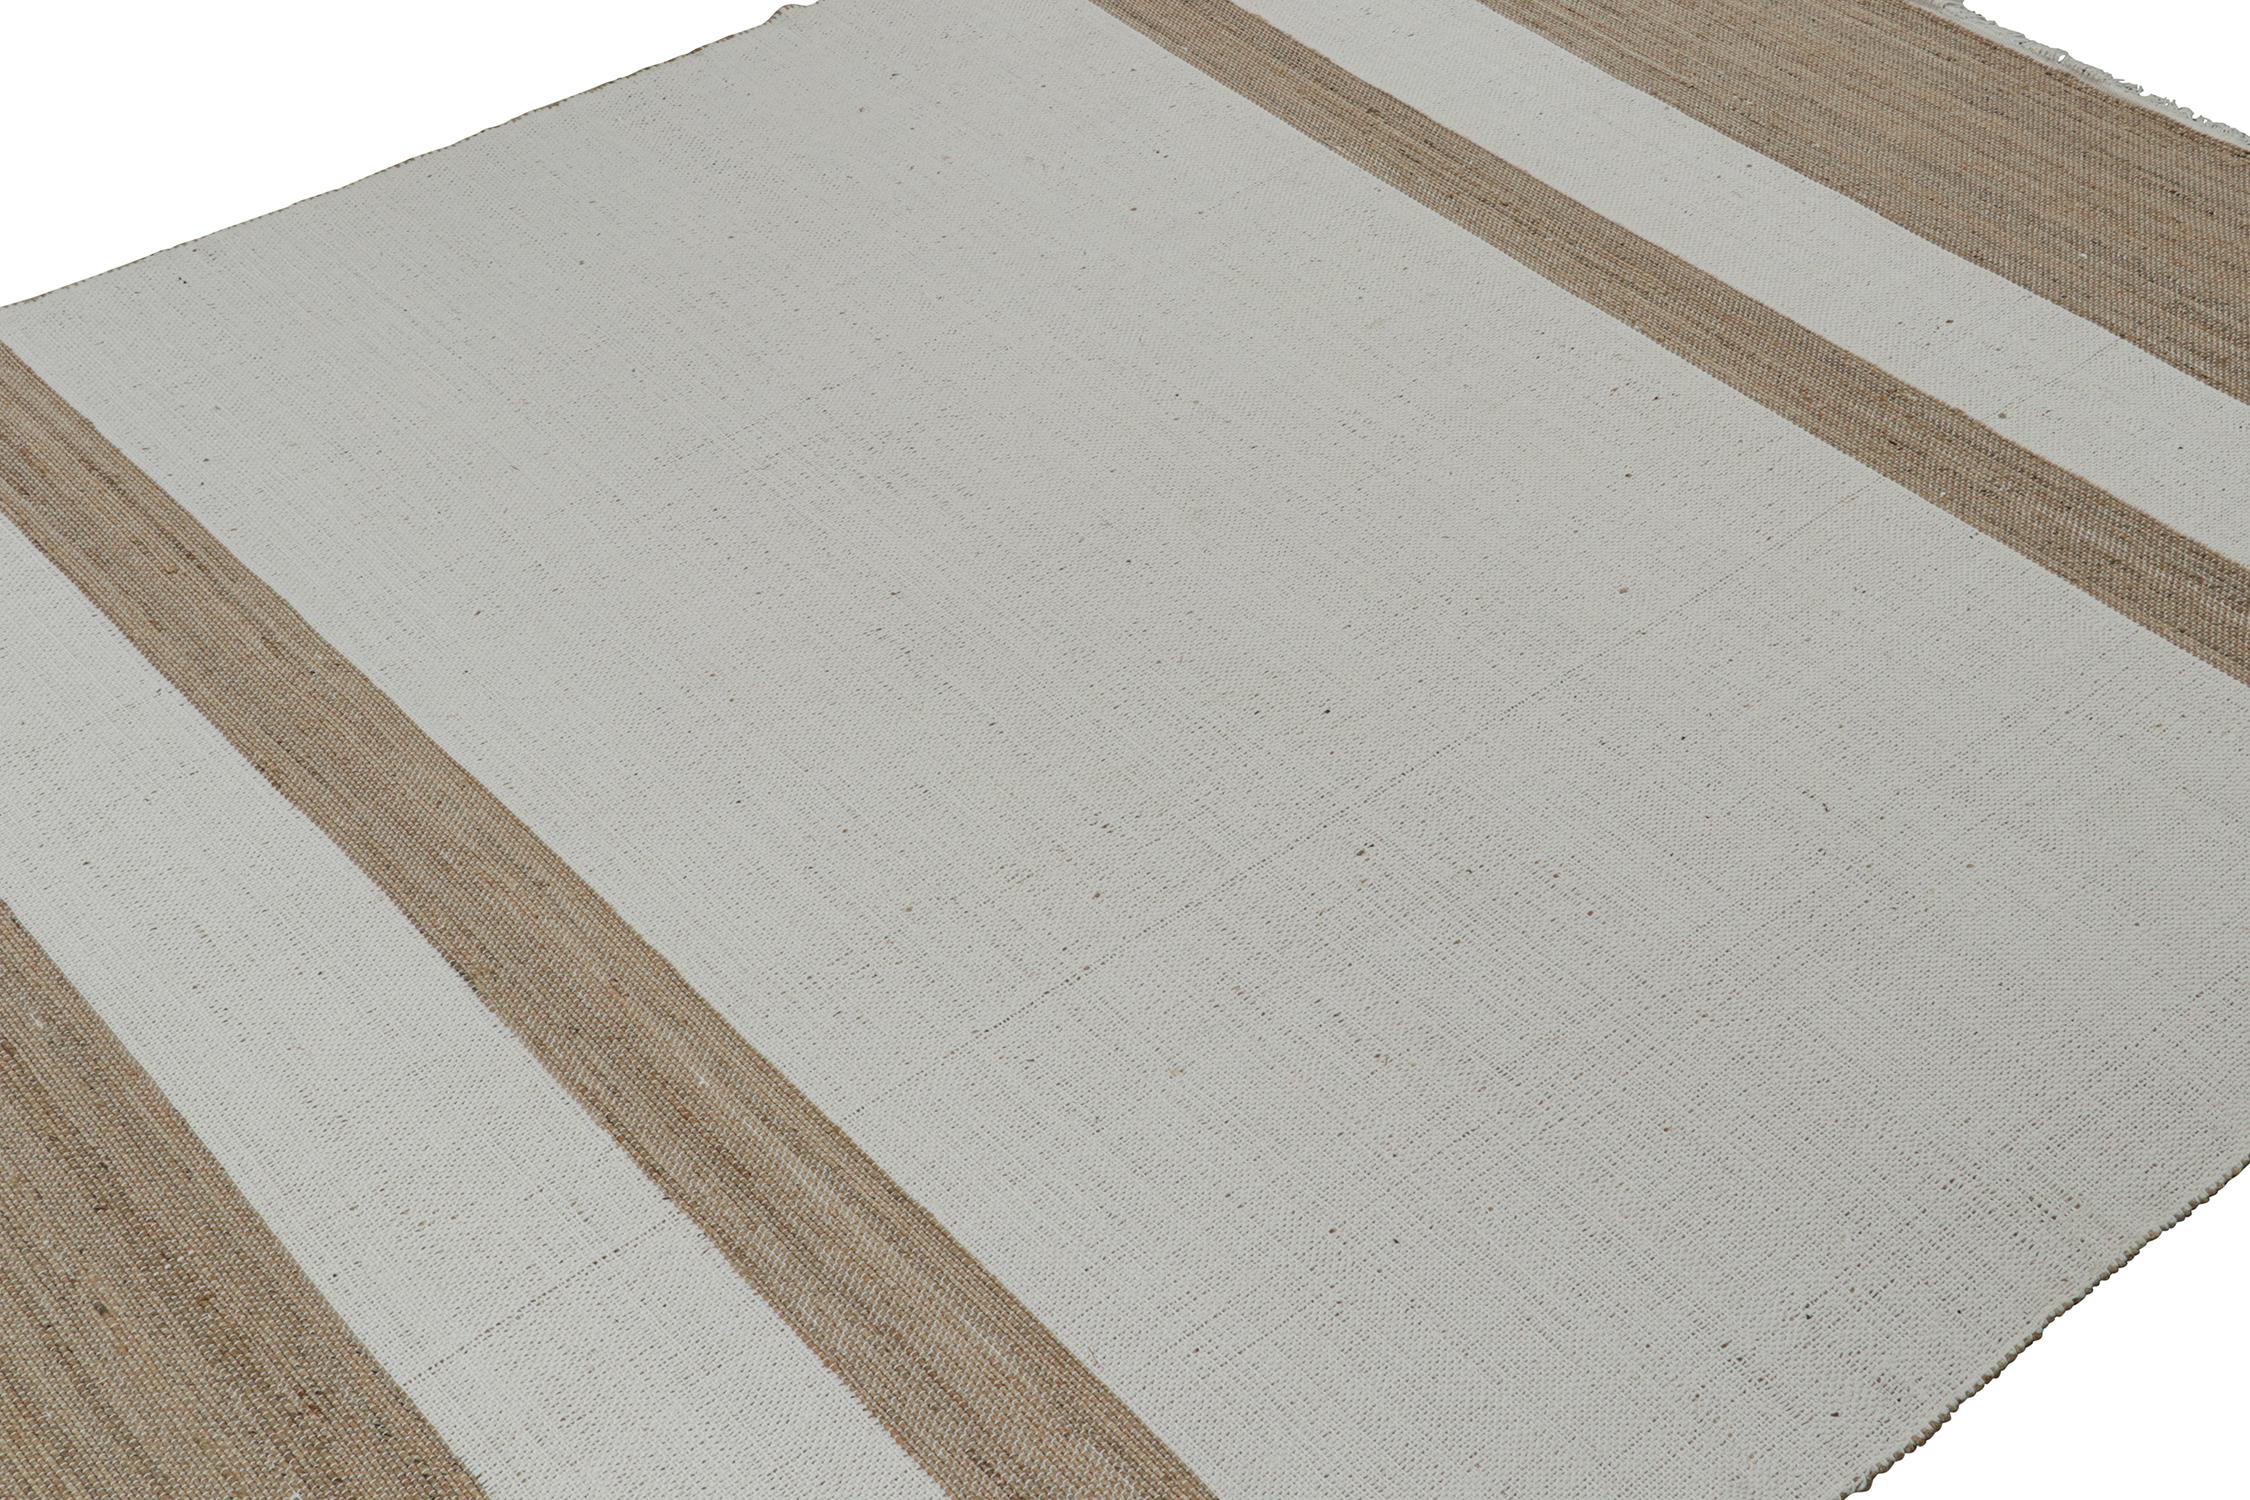 Indian Rug & Kilim’s Contemporary Jute Flat Weave in White and Beige-Brown Stripes For Sale